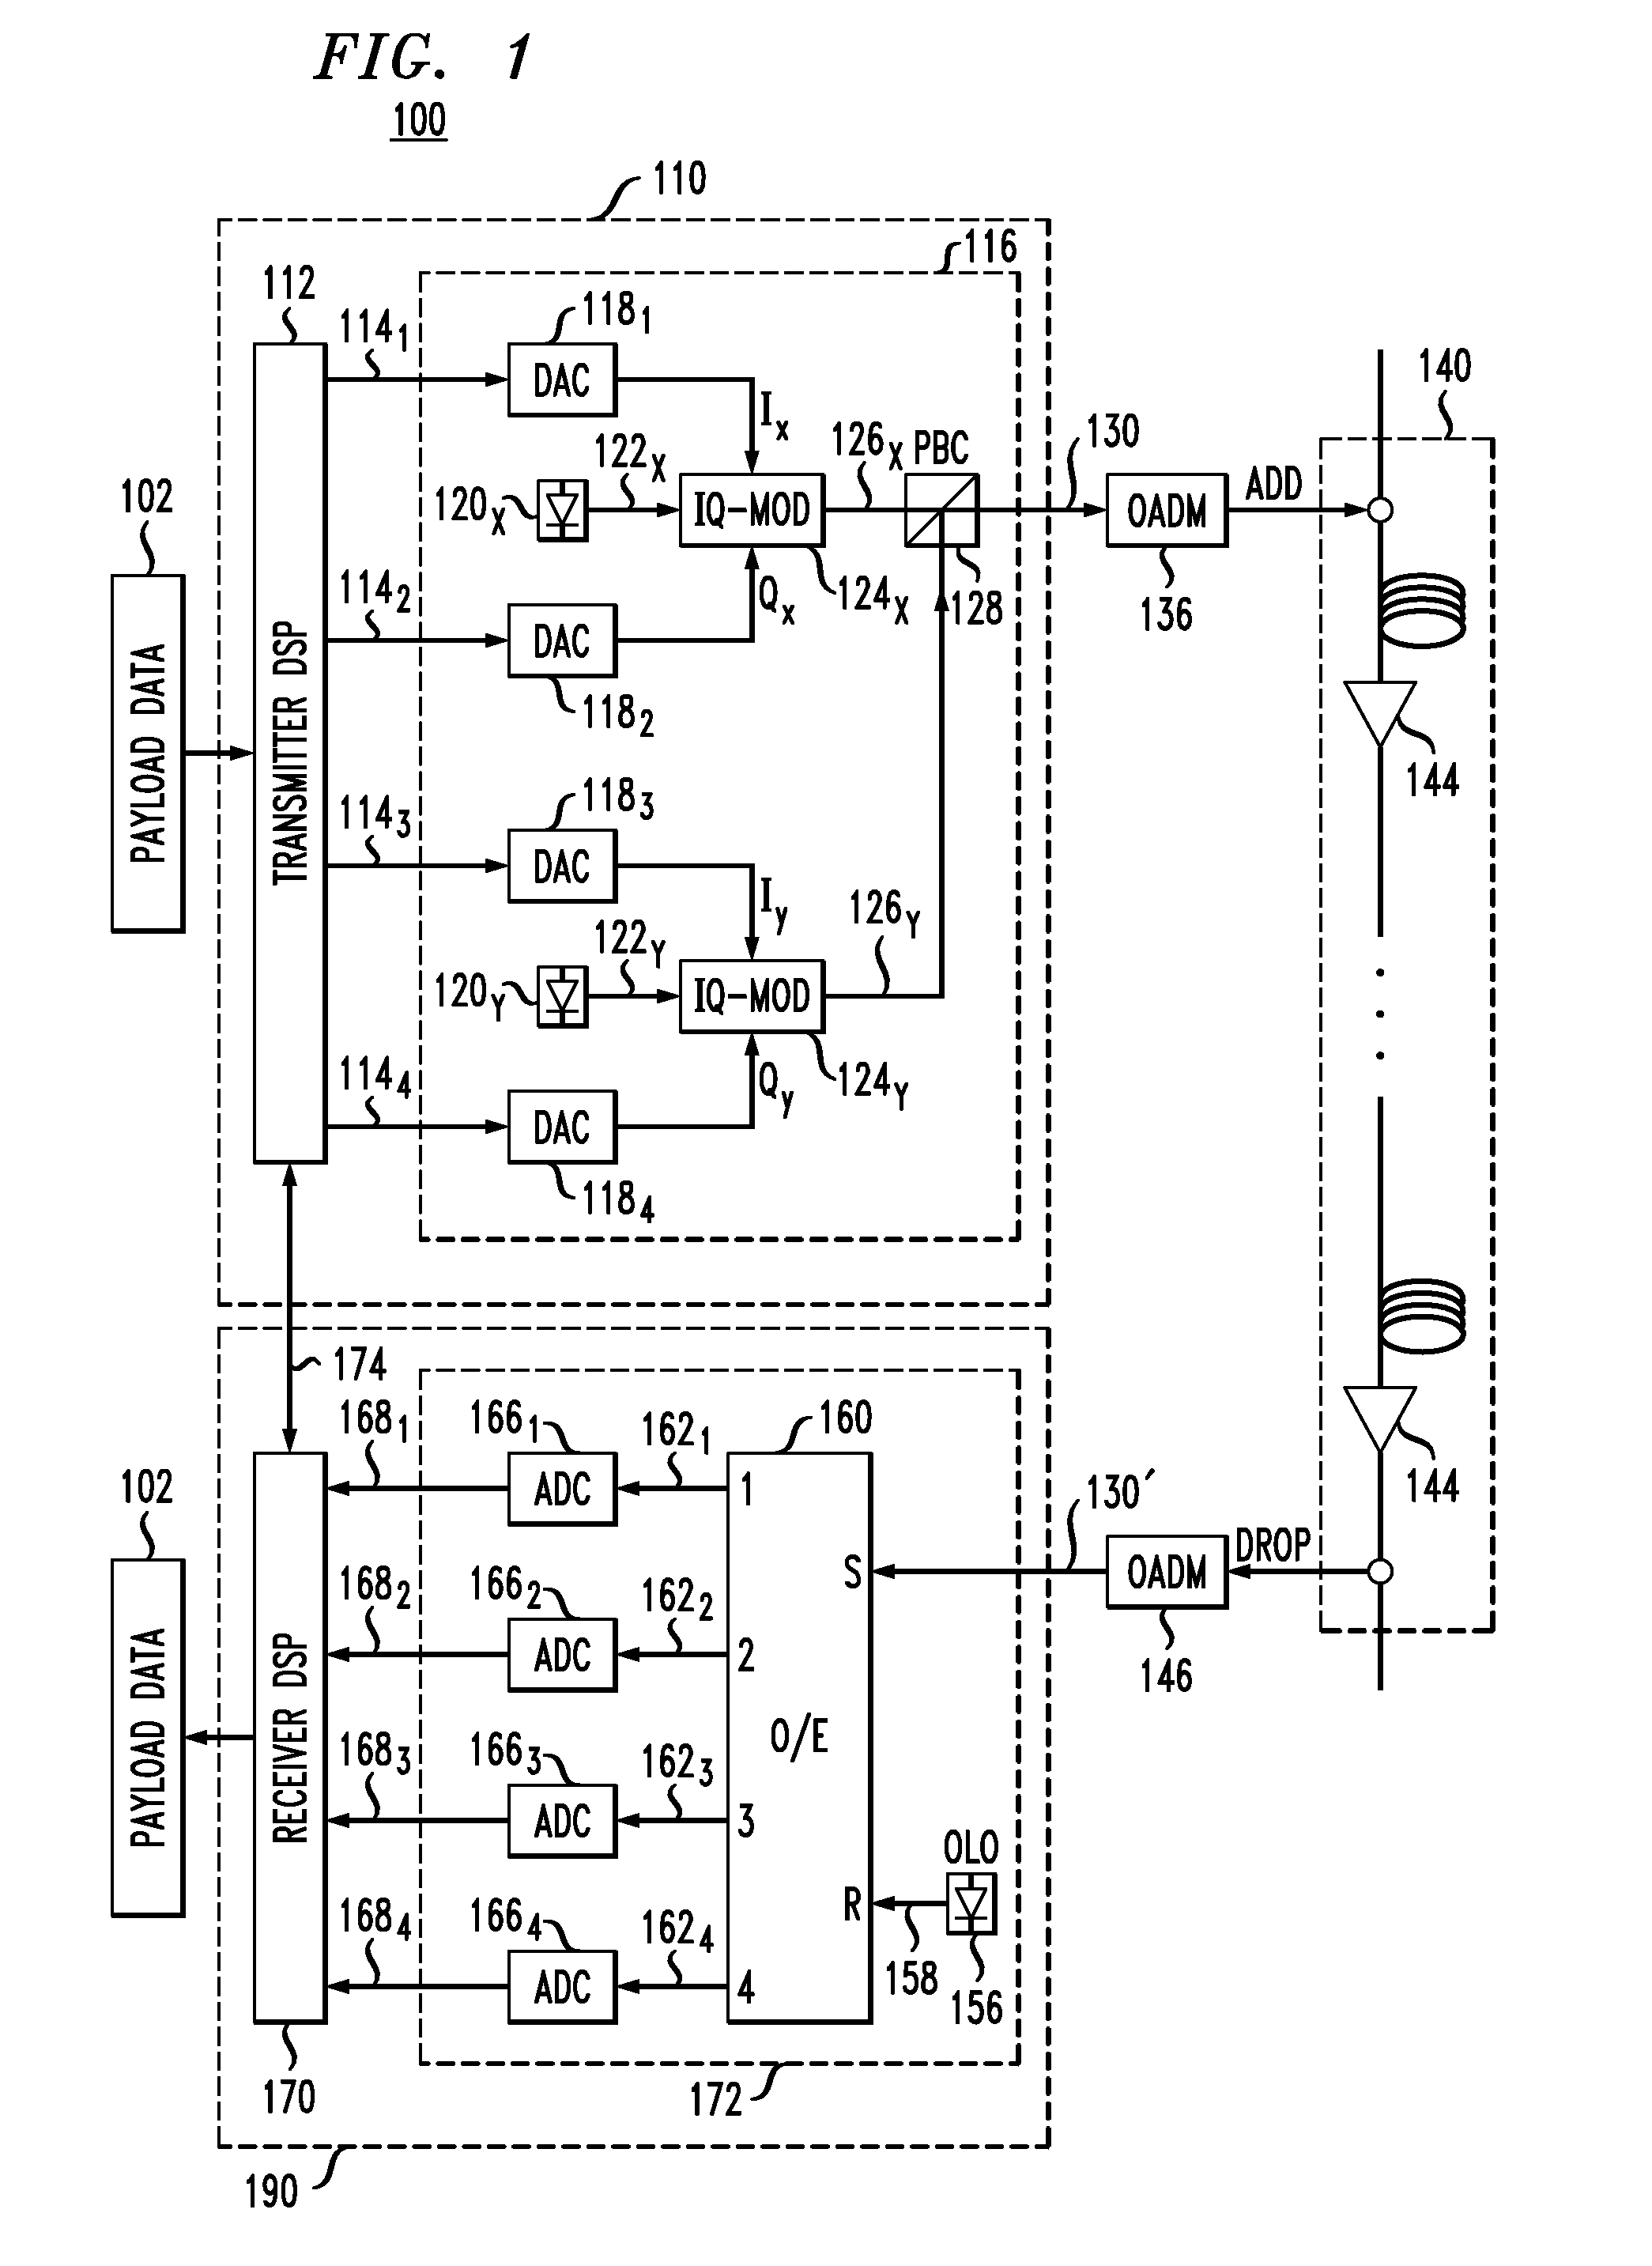 Adaptive constellations and decision regions for an optical transport system